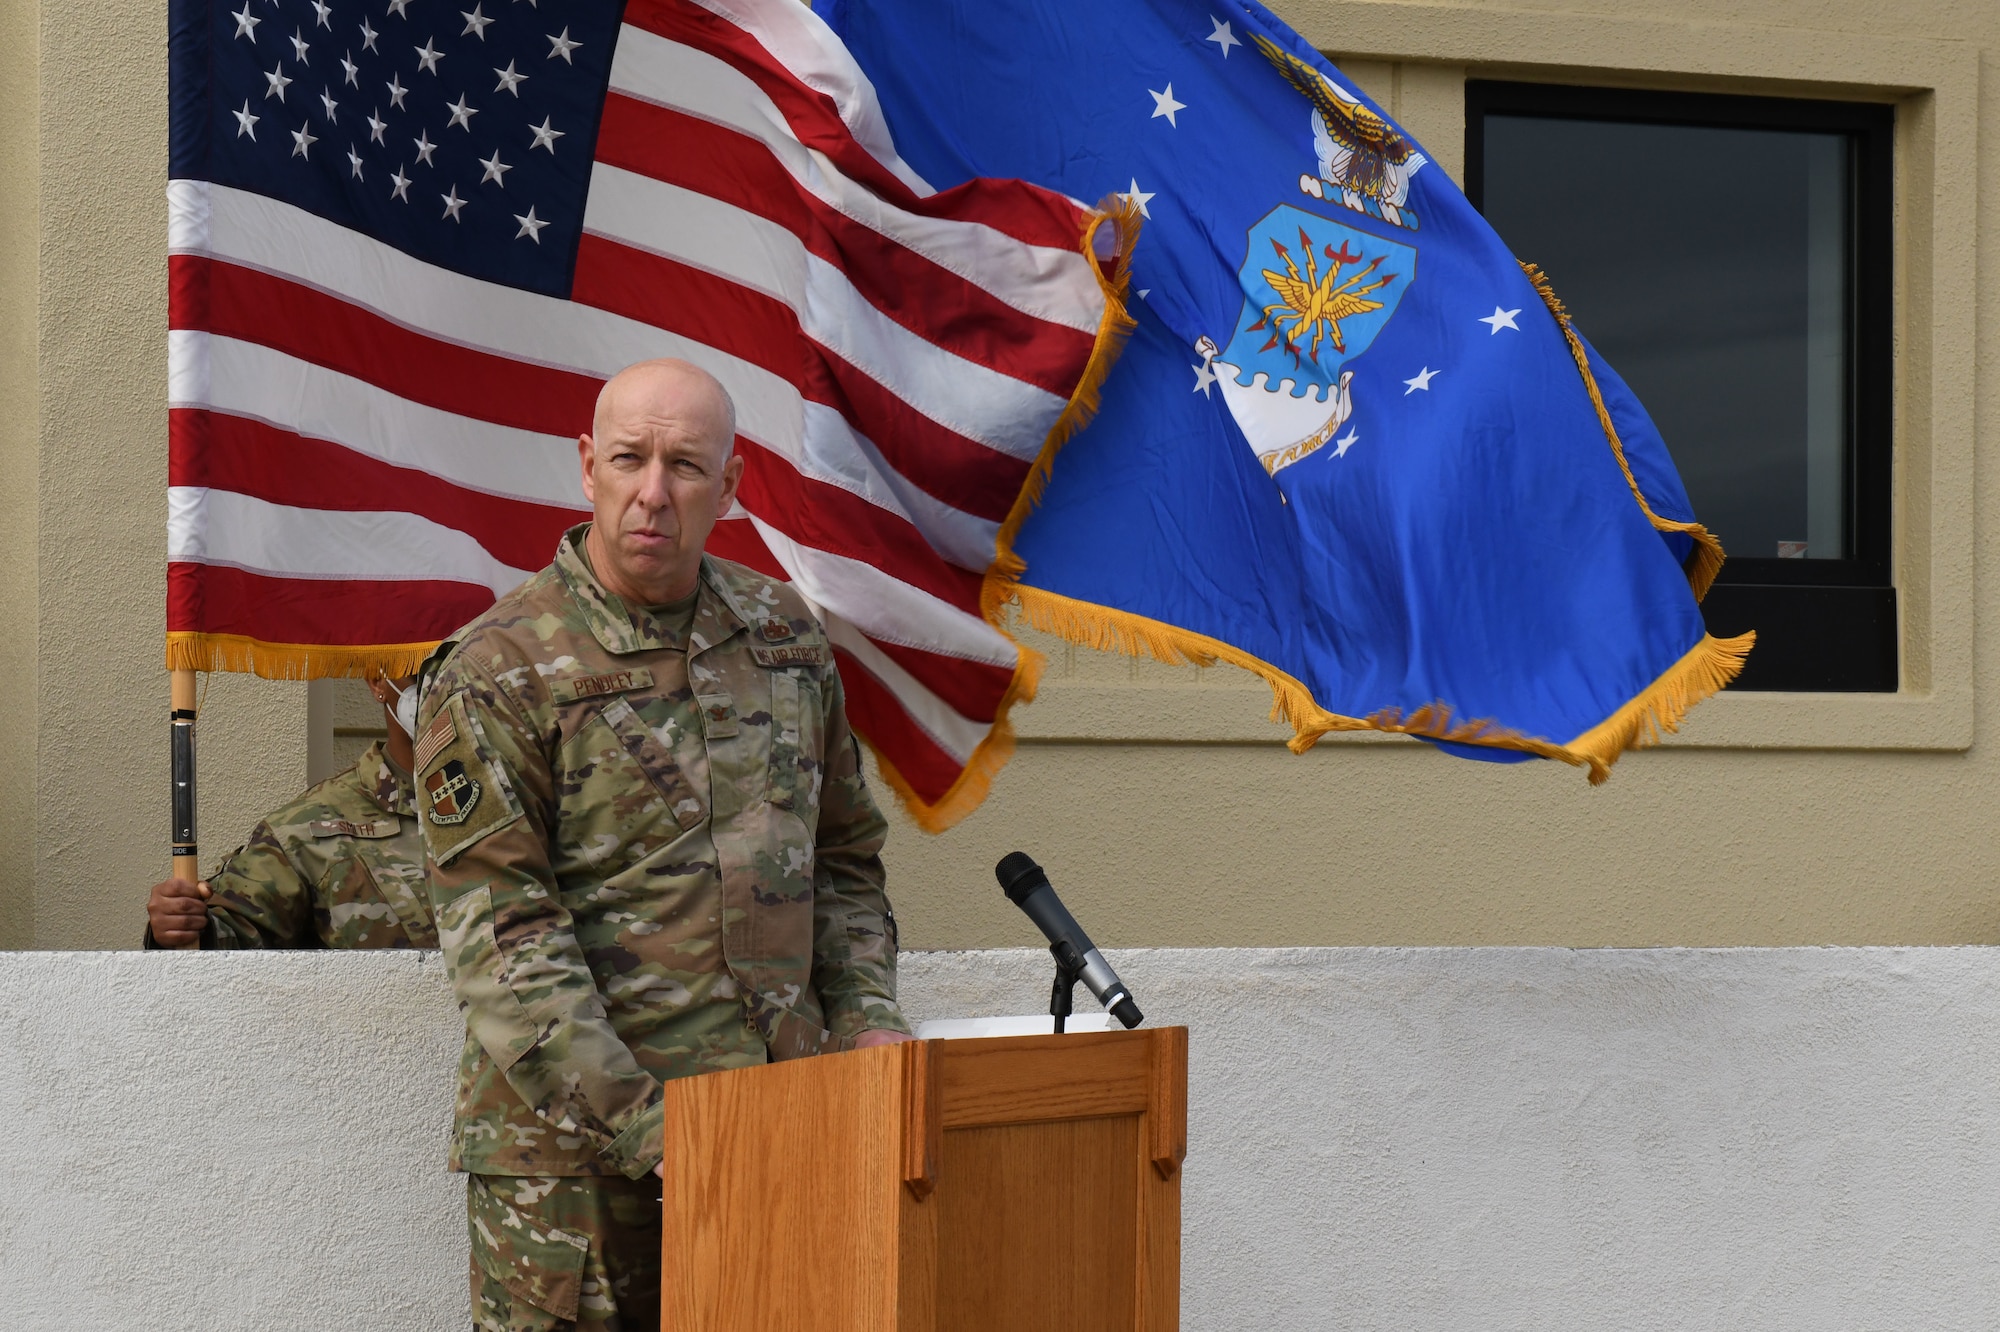 Col. Scotty Pendley, 9th Reconnaissance Wing A4/7 Director, gives his remarks at the Dragon’s Lair ribbon cutting ceremony Dec. 15, 2021, at Beale Air Force Base, California.